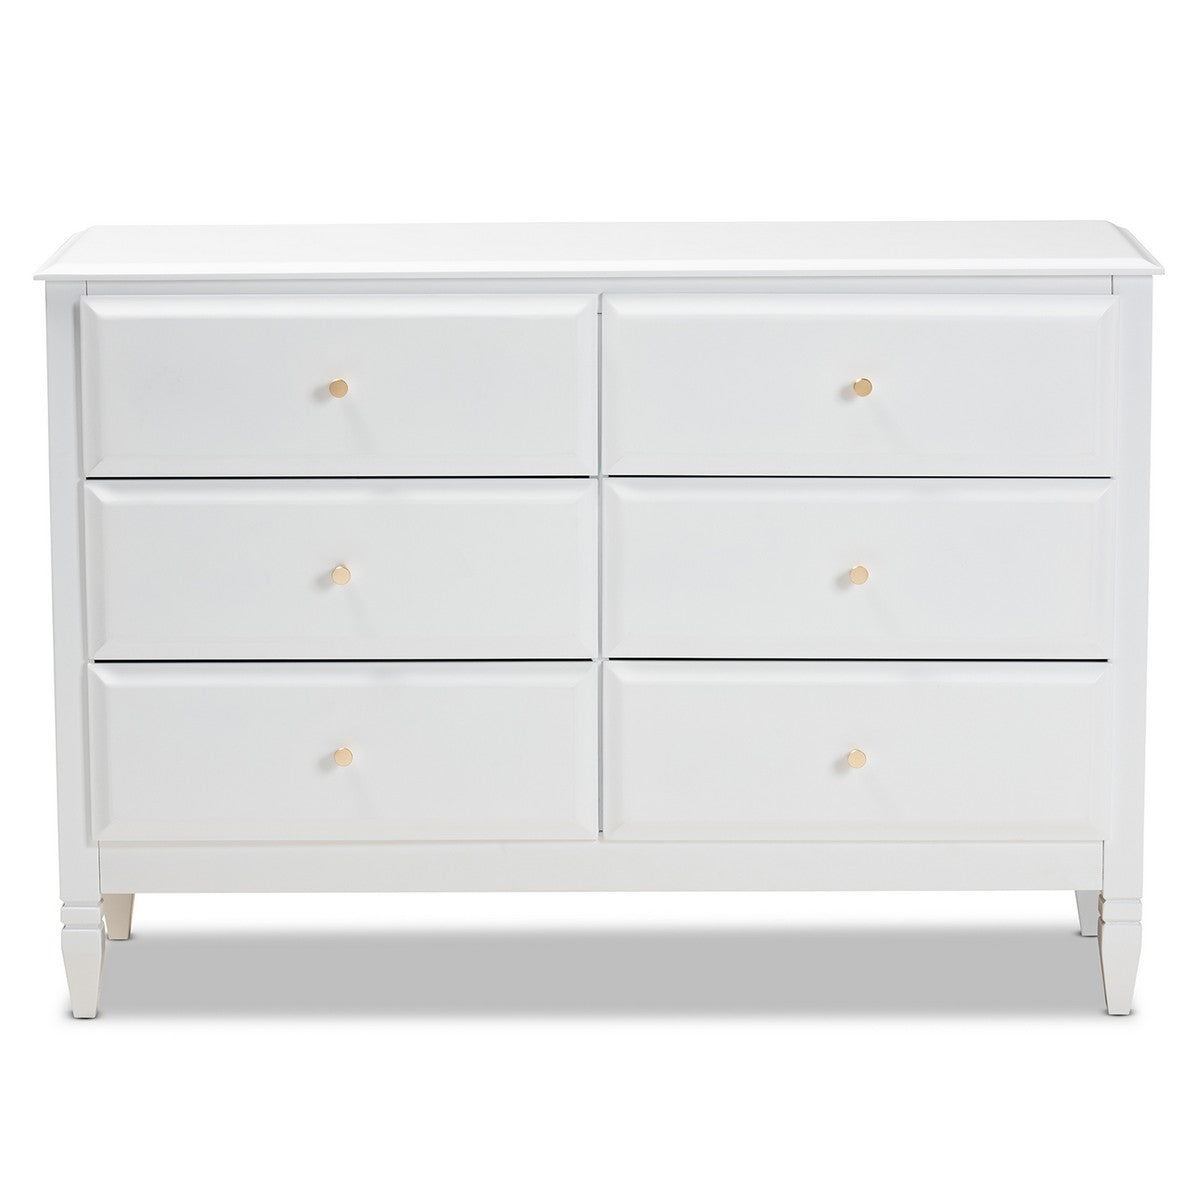 Baxton Studio Naomi Classic and Transitional White Finished Wood 6-Drawer Bedroom Dresser